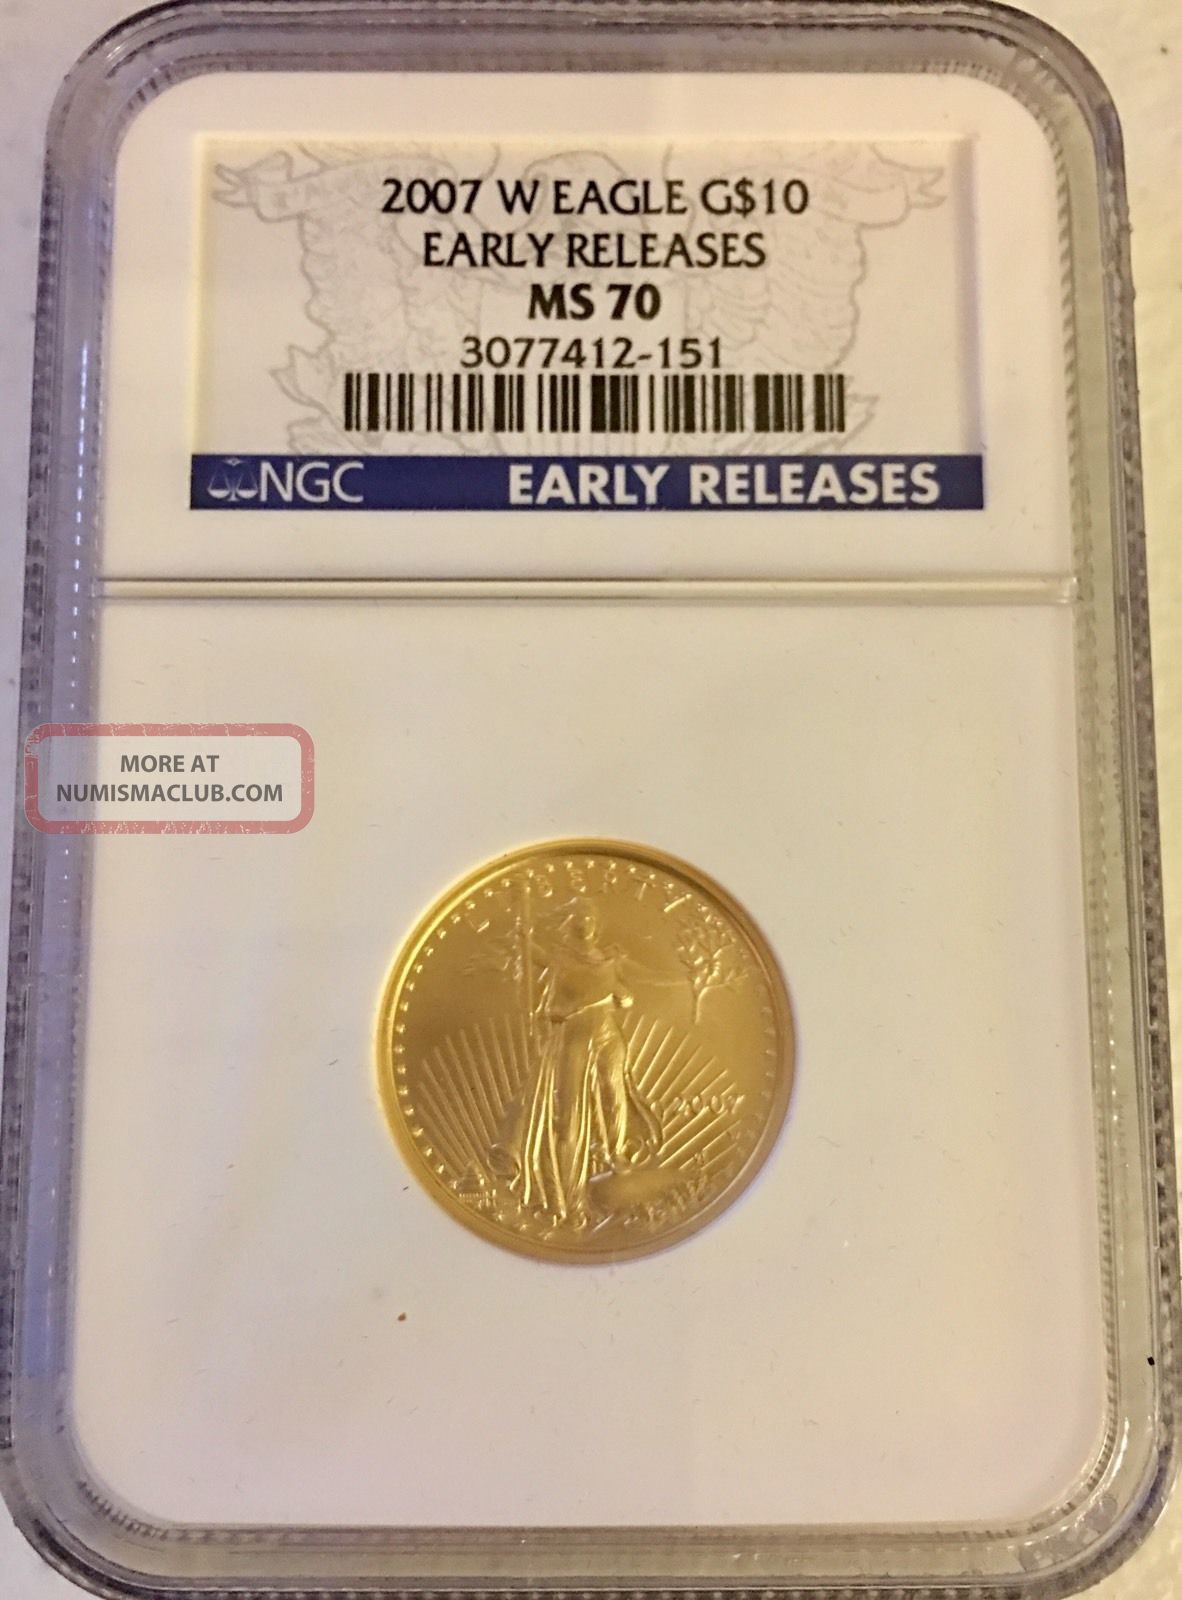 2007 W Gold American Eagle G$10 1/4oz Ms 70 Ngc Early Releases Ms70